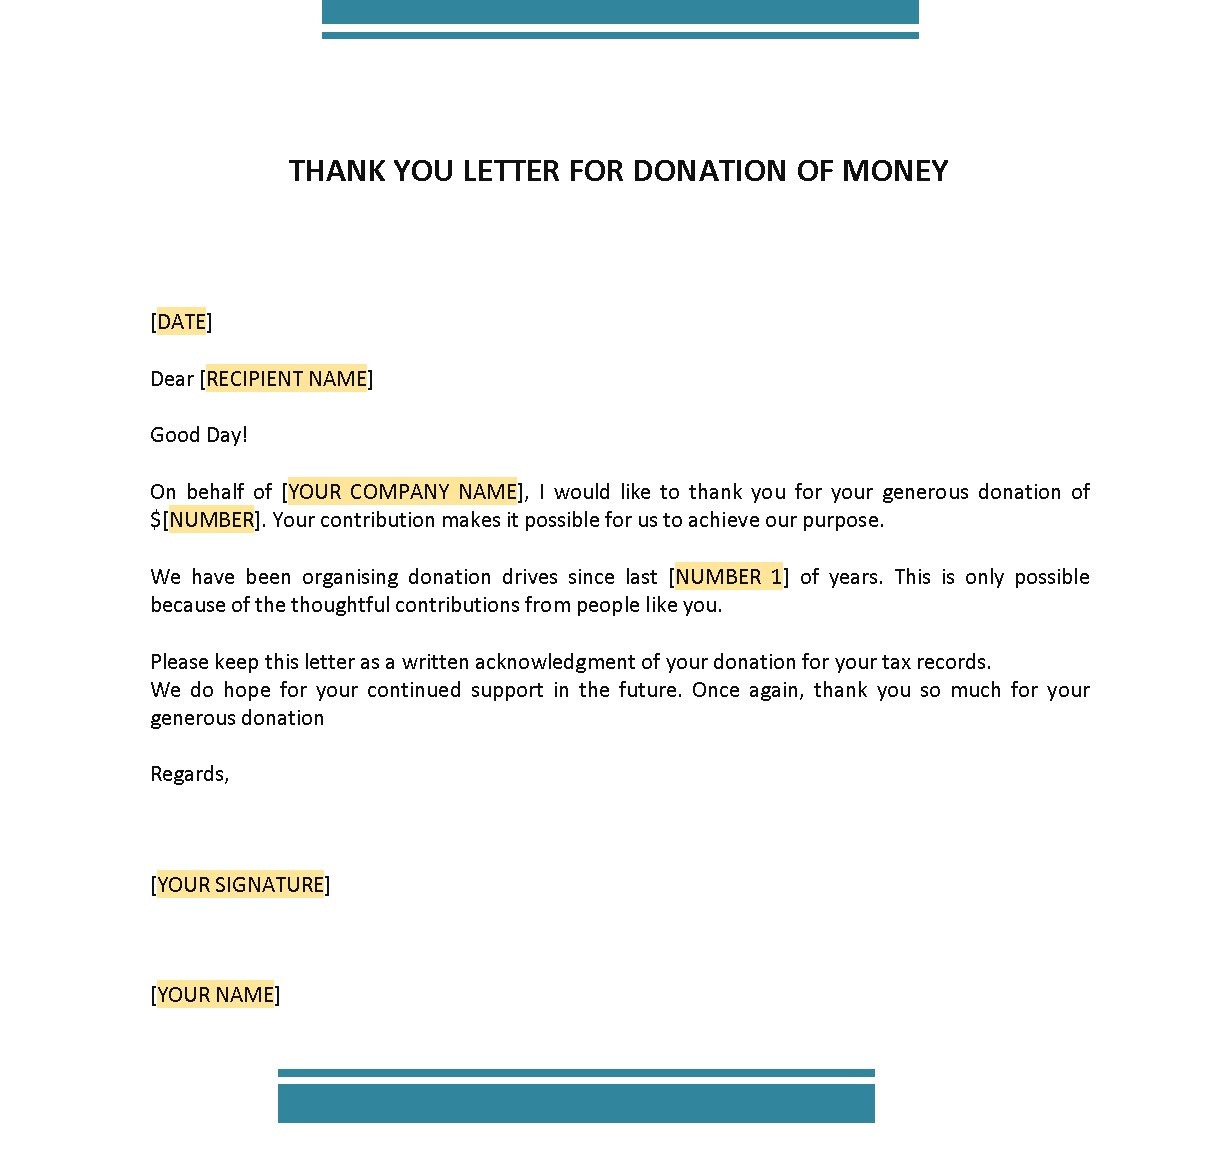 10+ Free Thank you Letter Samples for Donations - ExelTemplates